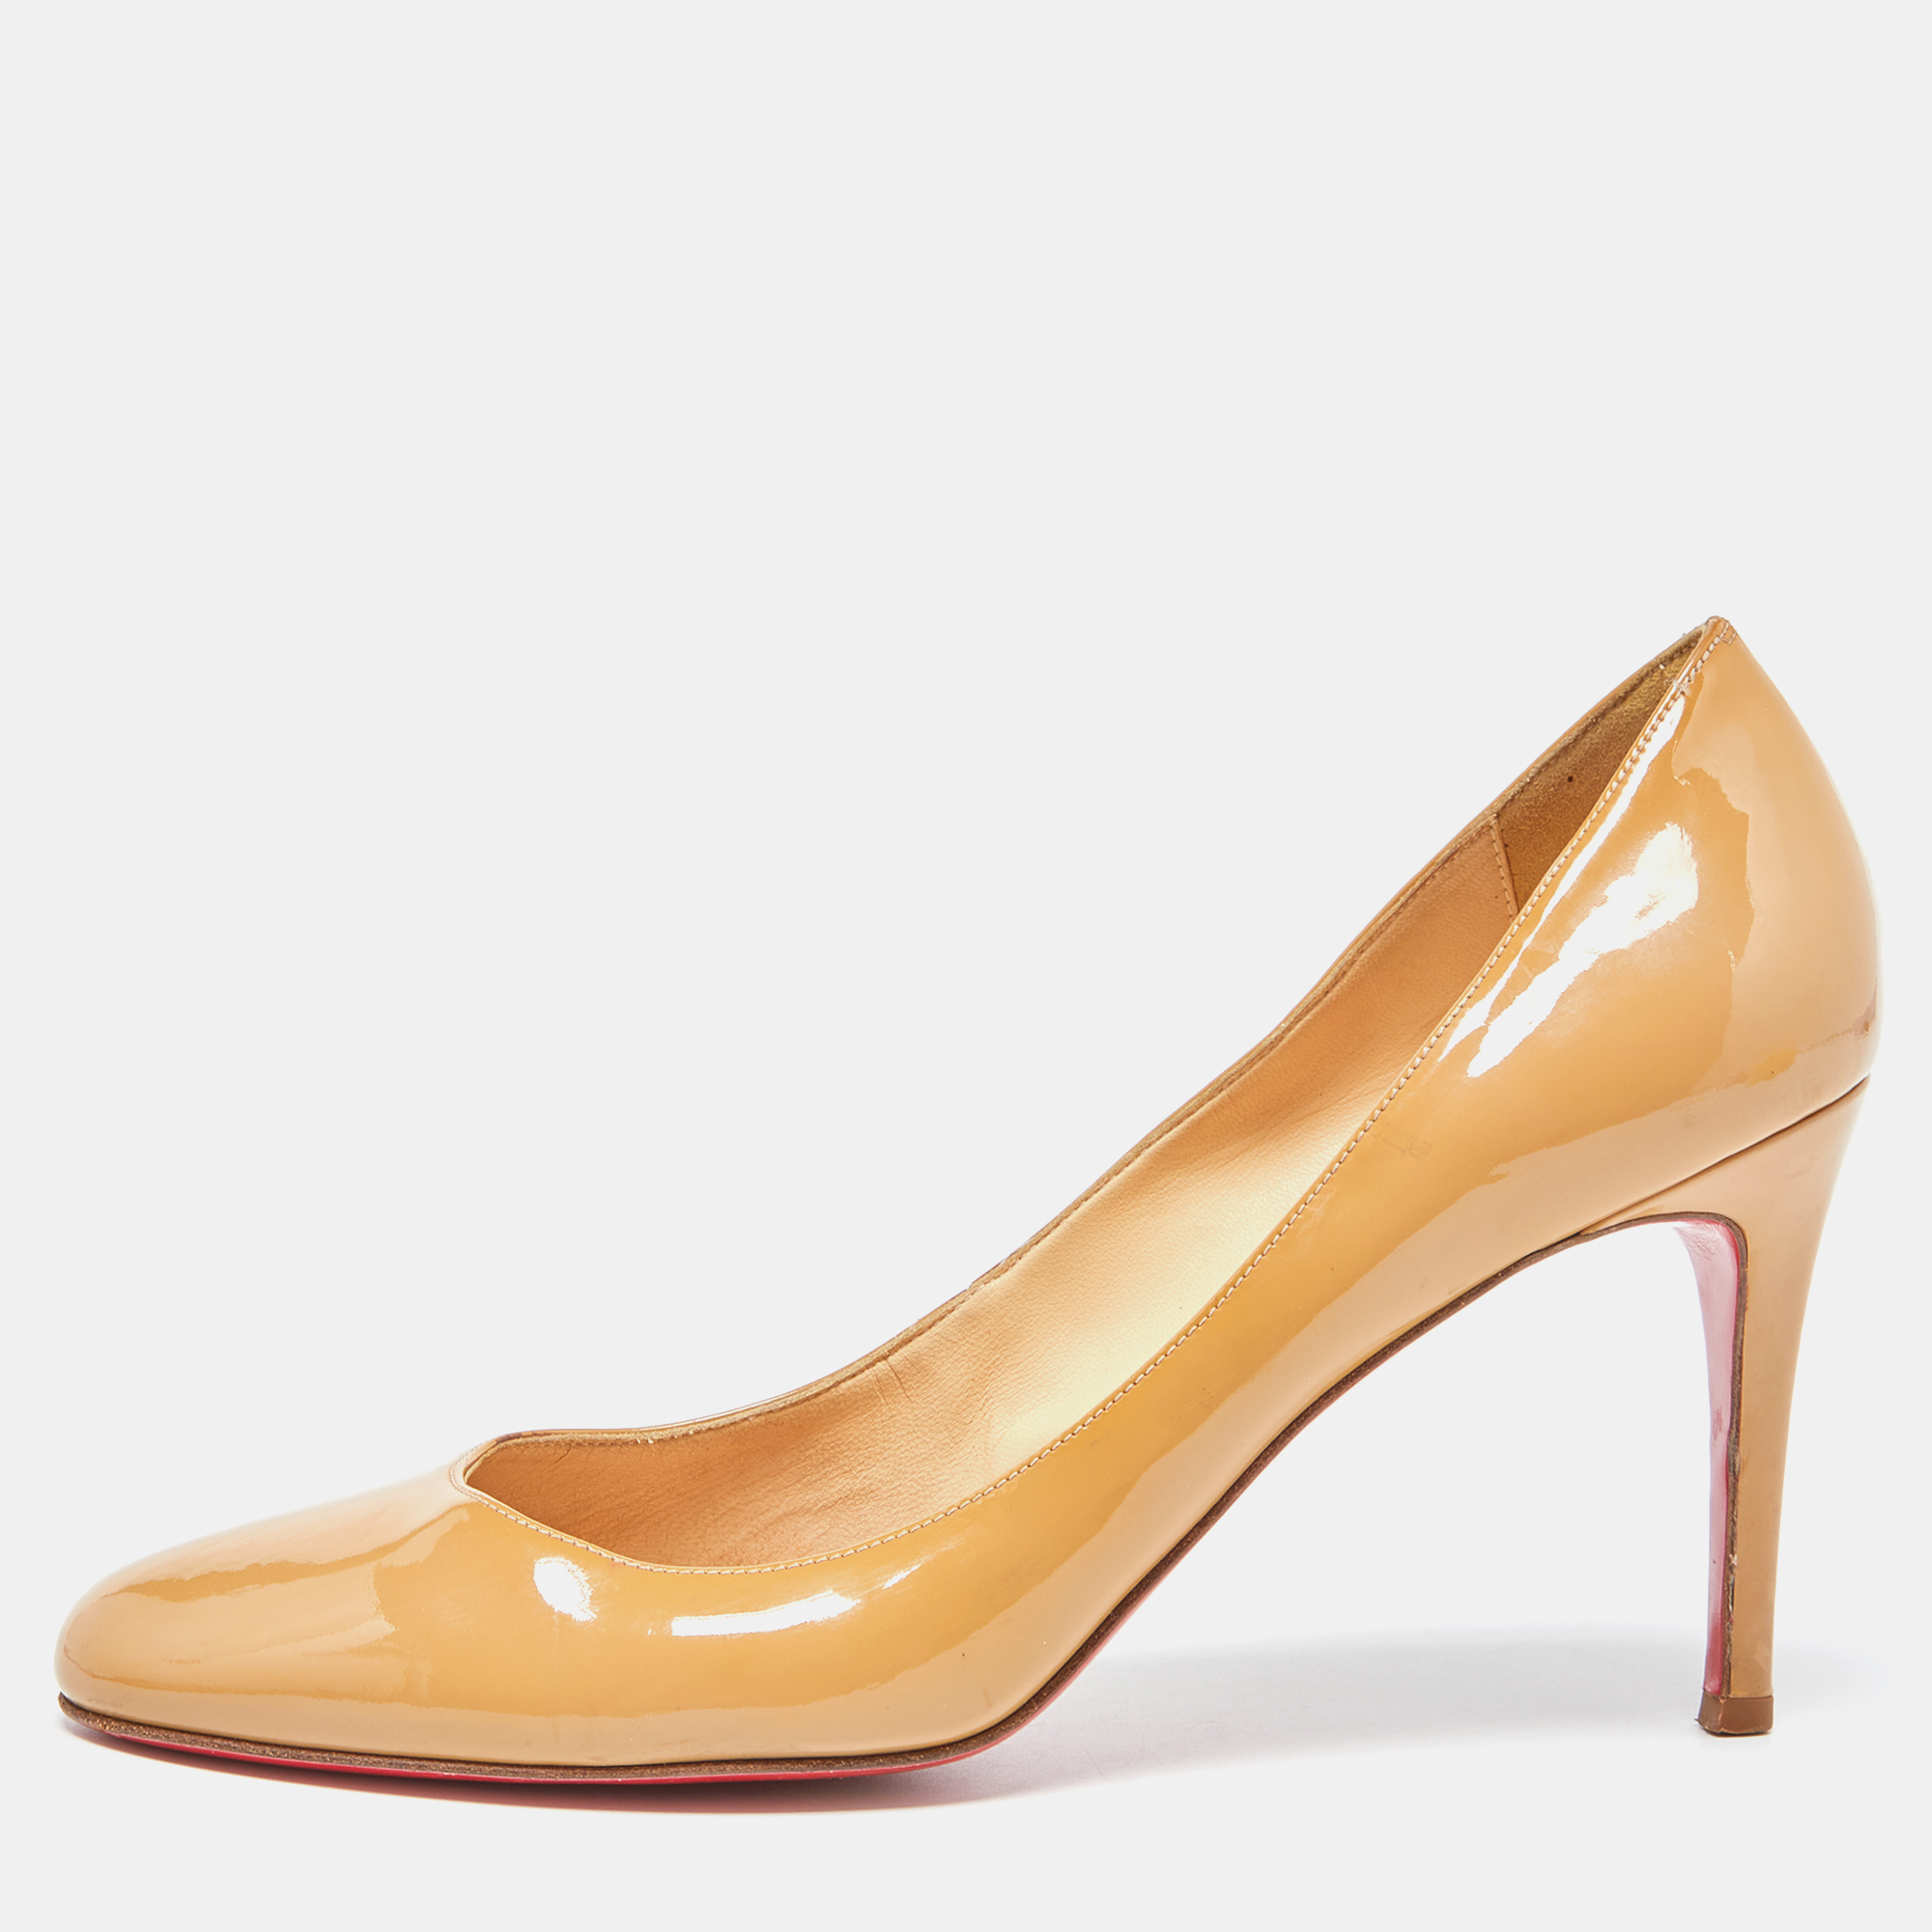 Christian Louboutin Beige Patent Leather Simple Pumps Size 39.5